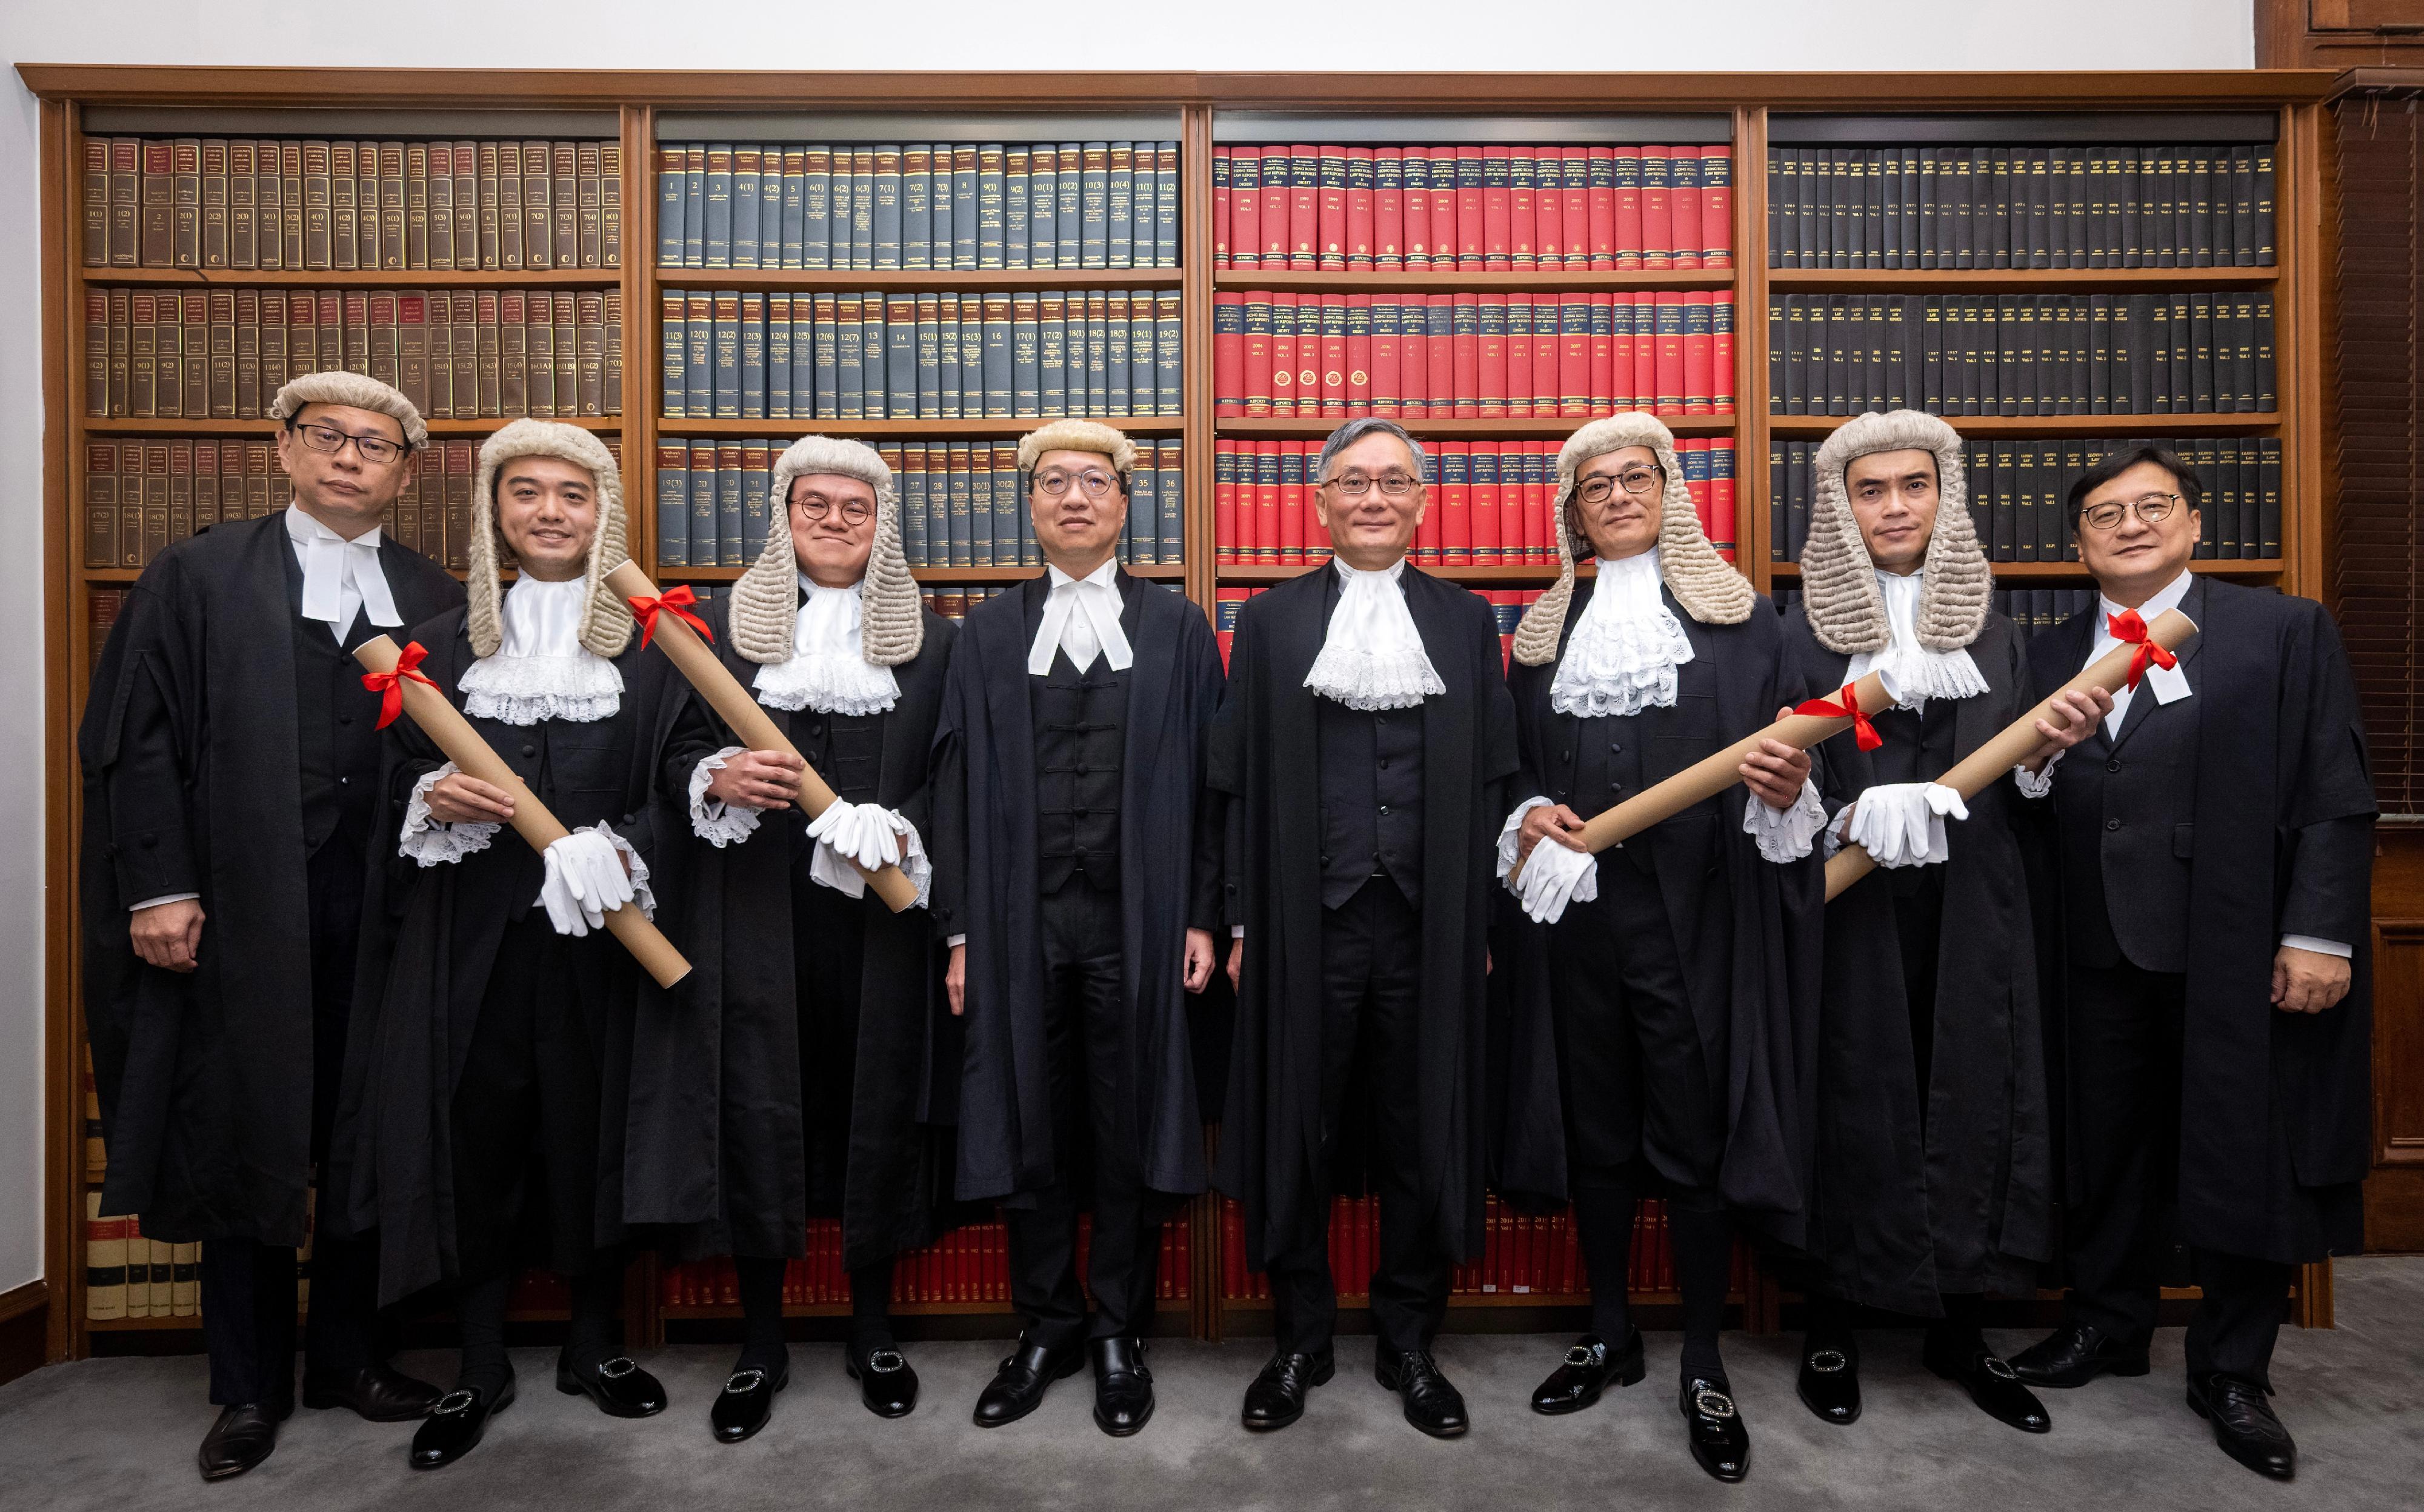 The ceremonial proceedings for the admission of the newly appointed Senior Counsel took place at the Court of Final Appeal today (May 20). Photo shows the Chief Justice of the Court of Final Appeal, Mr Andrew Cheung Kui-nung (fourth right); the Secretary for Justice, Mr Paul Lam, SC (fourth left); the Chairman of the Hong Kong Bar Association, Mr Victor Dawes, SC (first left); and the President of the Law Society of Hong Kong, Mr Chan Chak-ming (first right), with the newly appointed Senior Counsel Mr Bruce Tse Chee-ho (third right), Mr Anthony Chan Ho-ki (third left), Mr Mike Lui Sai-kit (second right) and Mr Christopher Chain Siao-liang (second left).